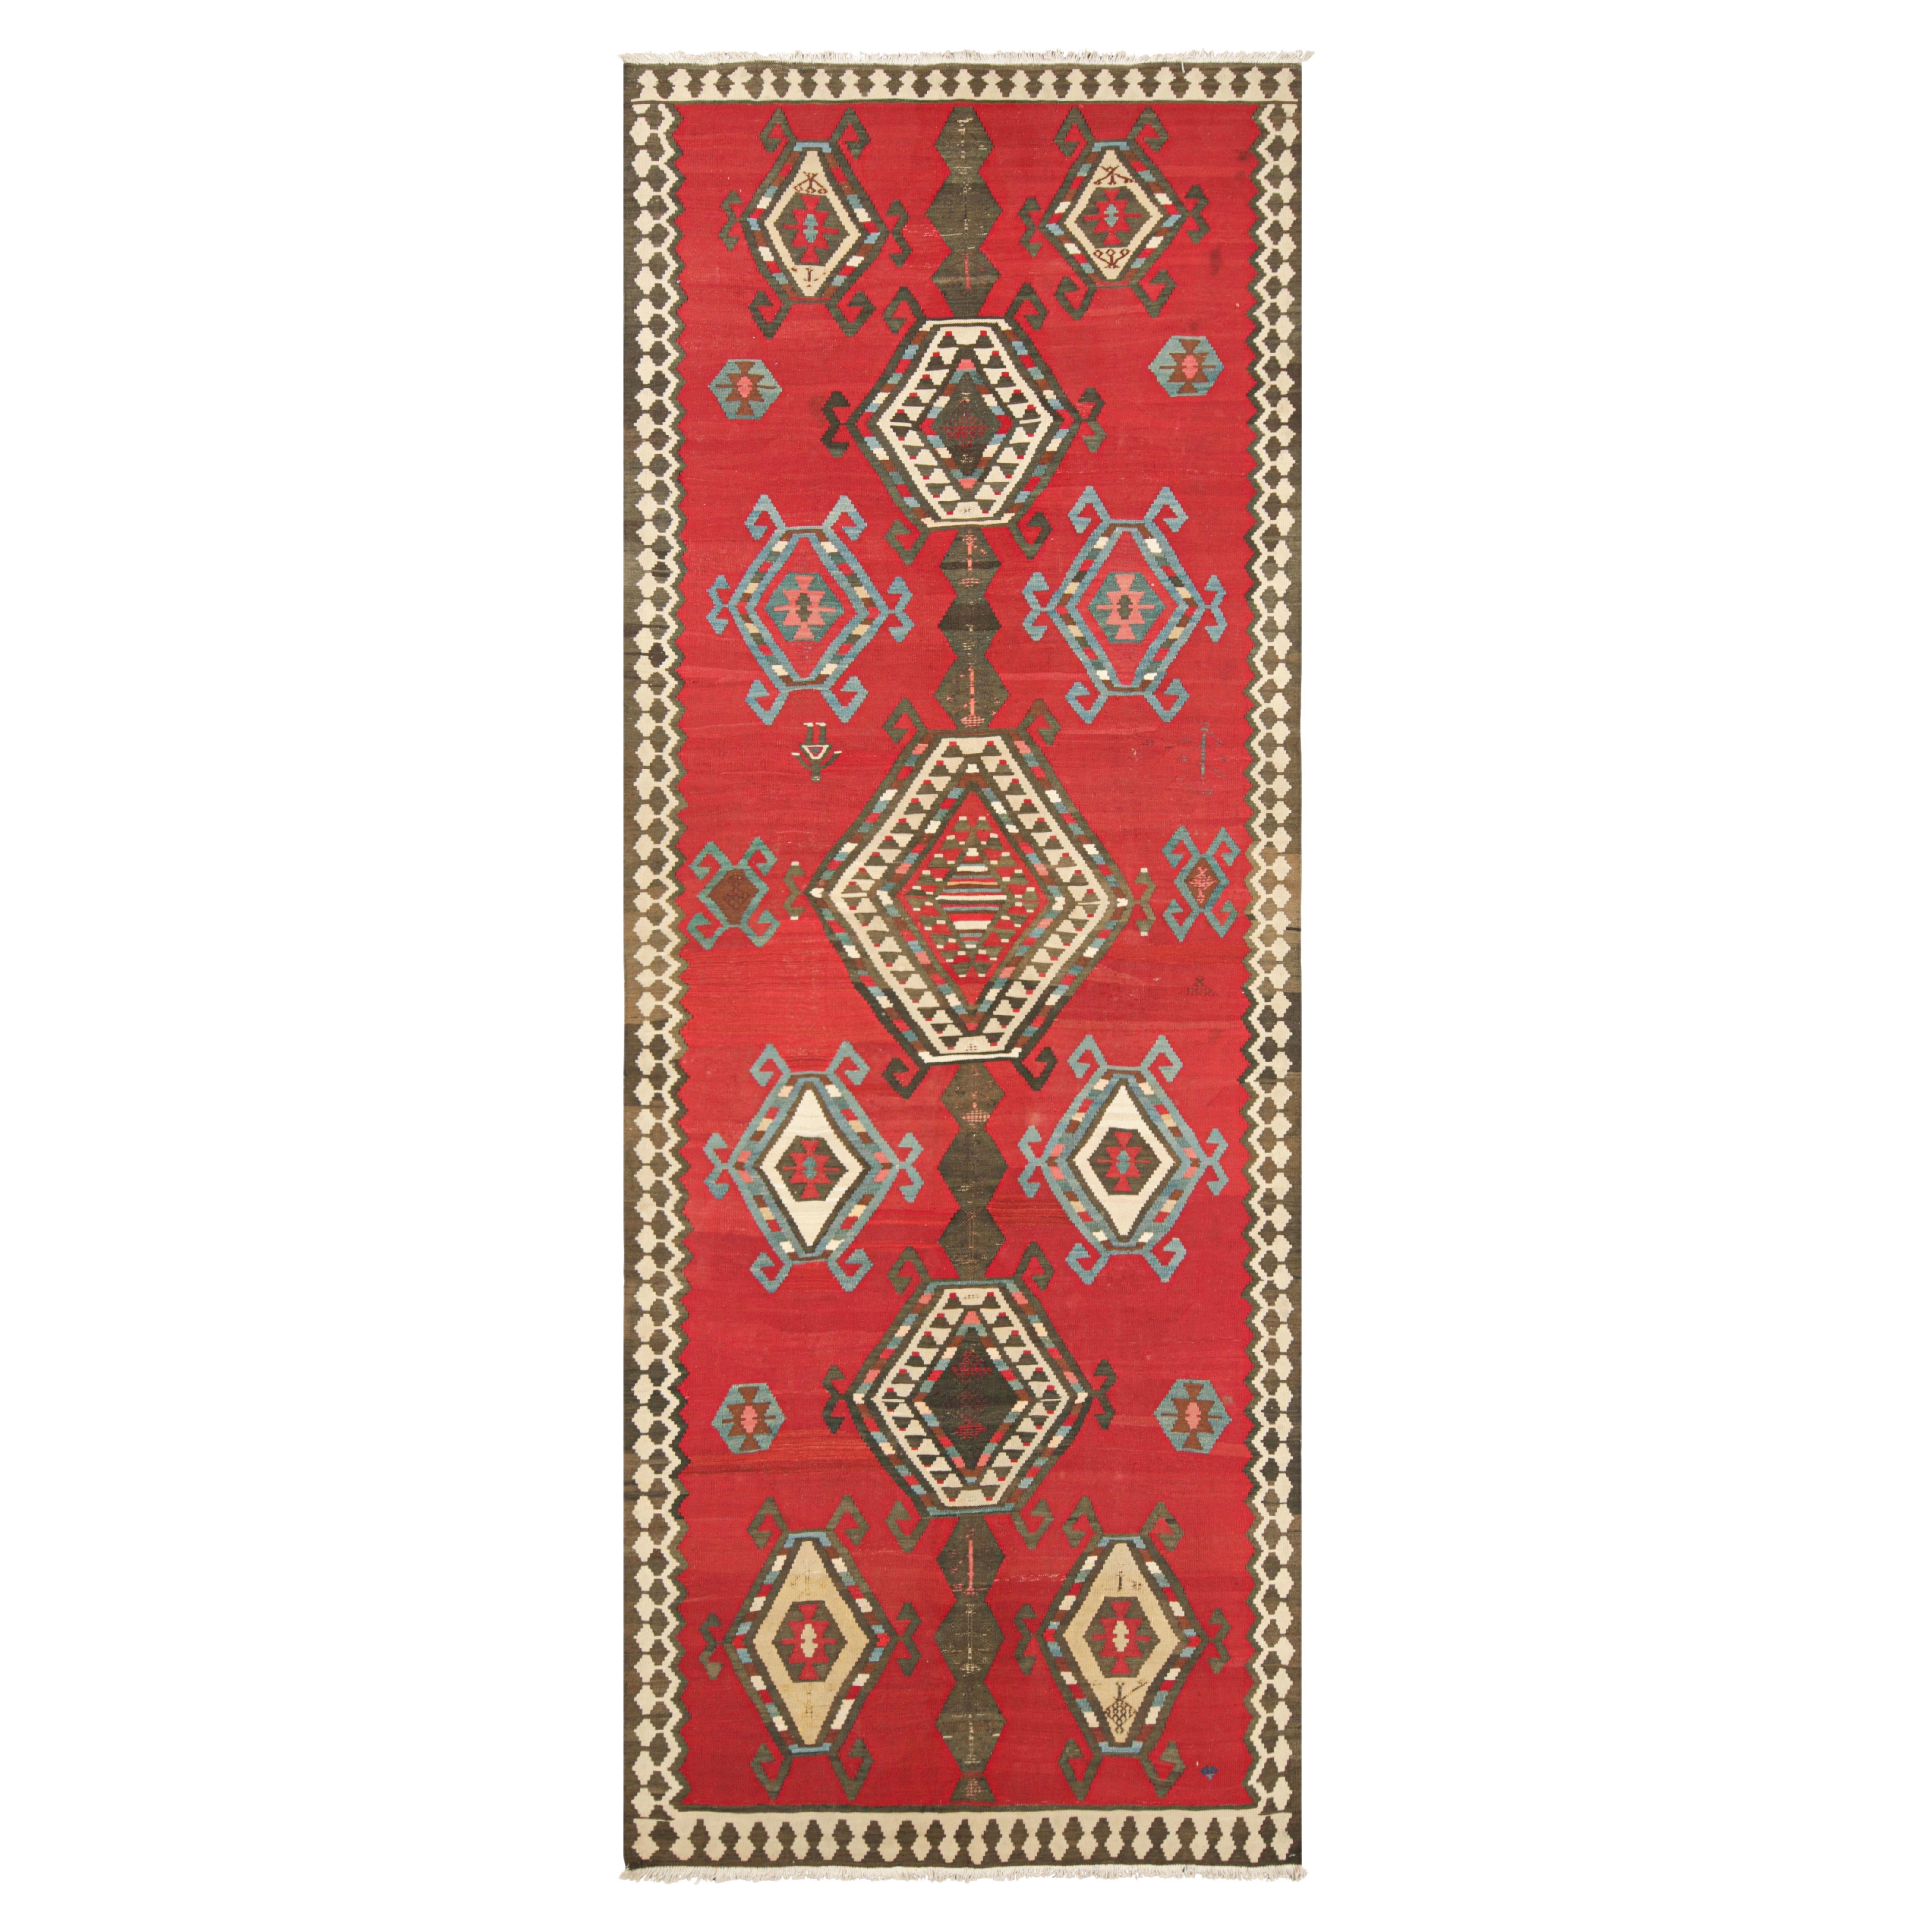 Vintage Turkish Kilim Runner in Red with Geometric Medallions, from Rug & Kilim